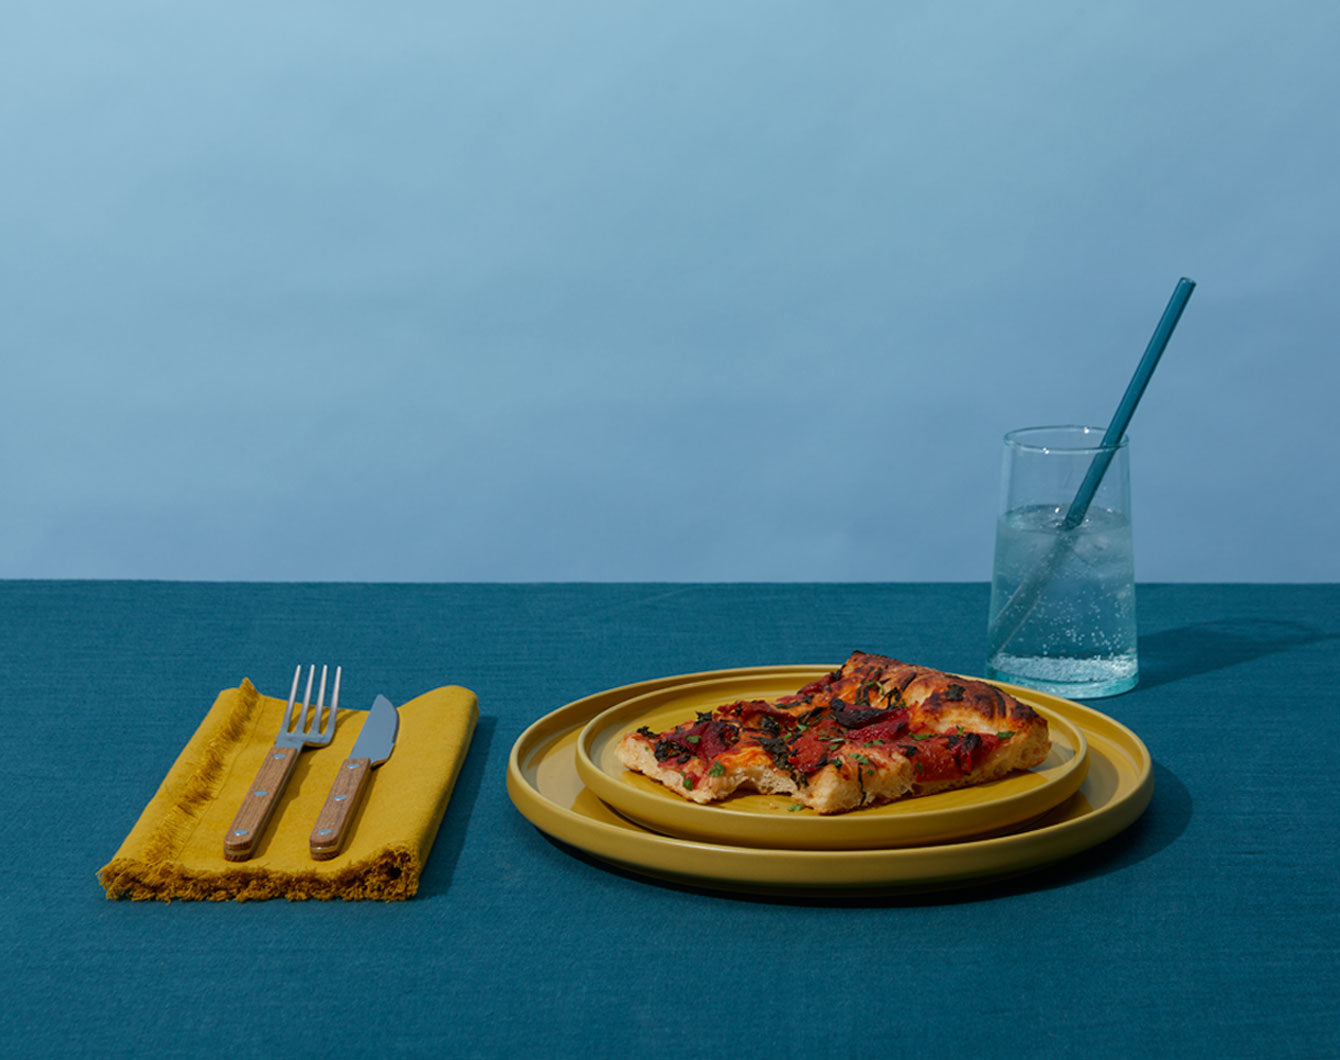 mustard colored dinnerware styled with a slice of pizza, a blue drinking glass and mustard linen napkin with teak flatware on a blue background